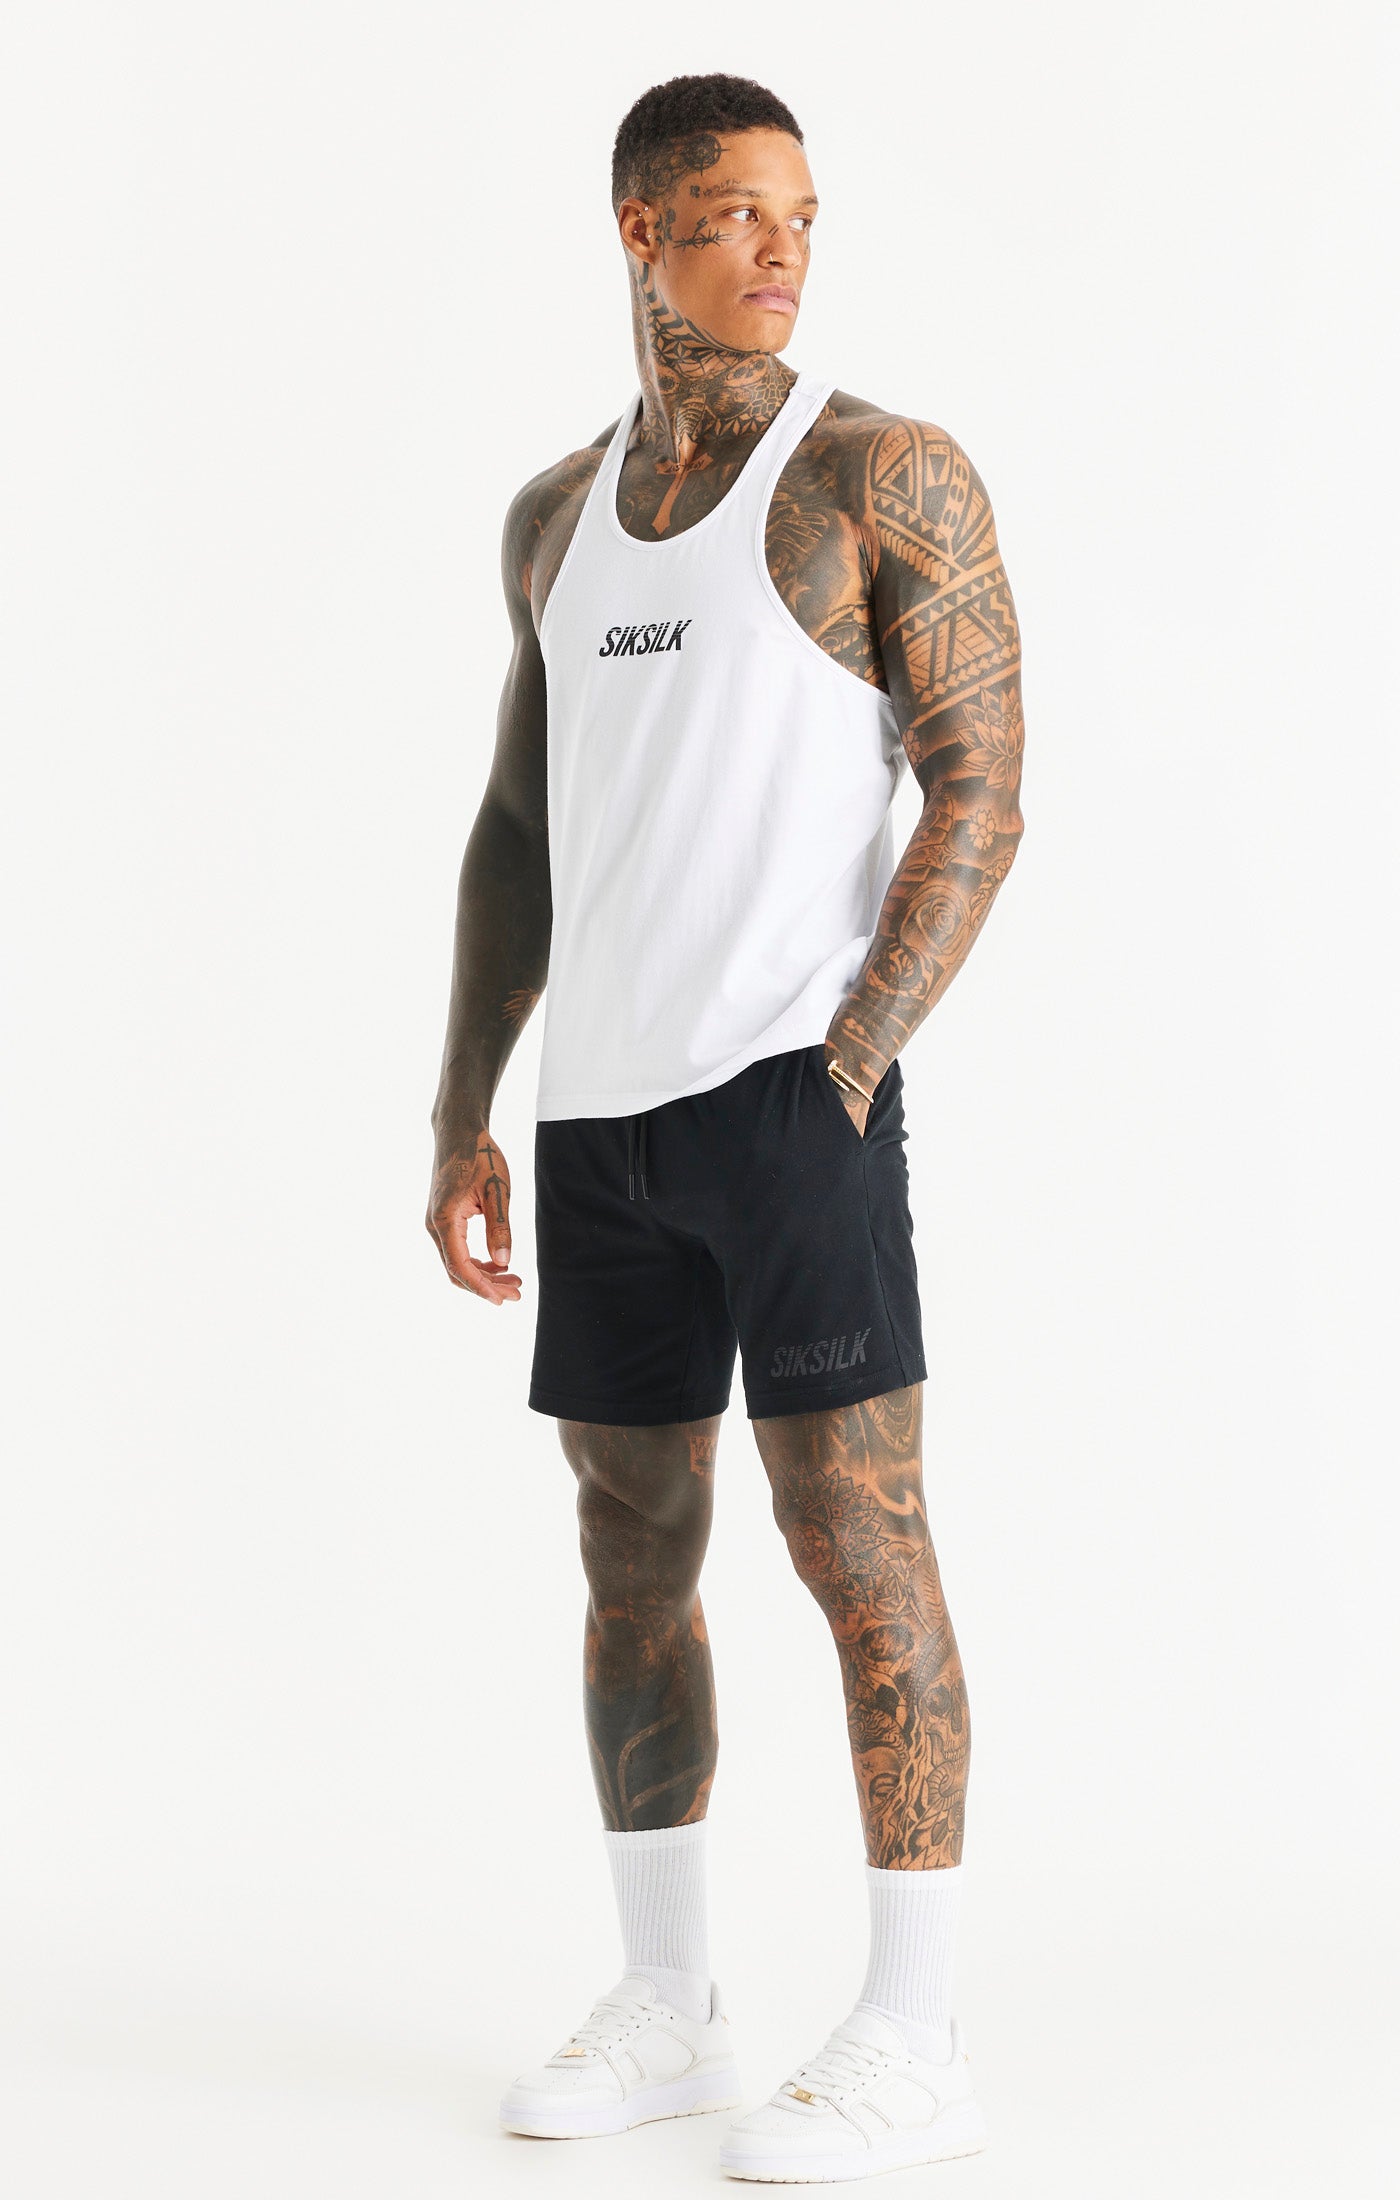 Load image into Gallery viewer, SikSilk Brand Carrier Racer Vest - White (3)